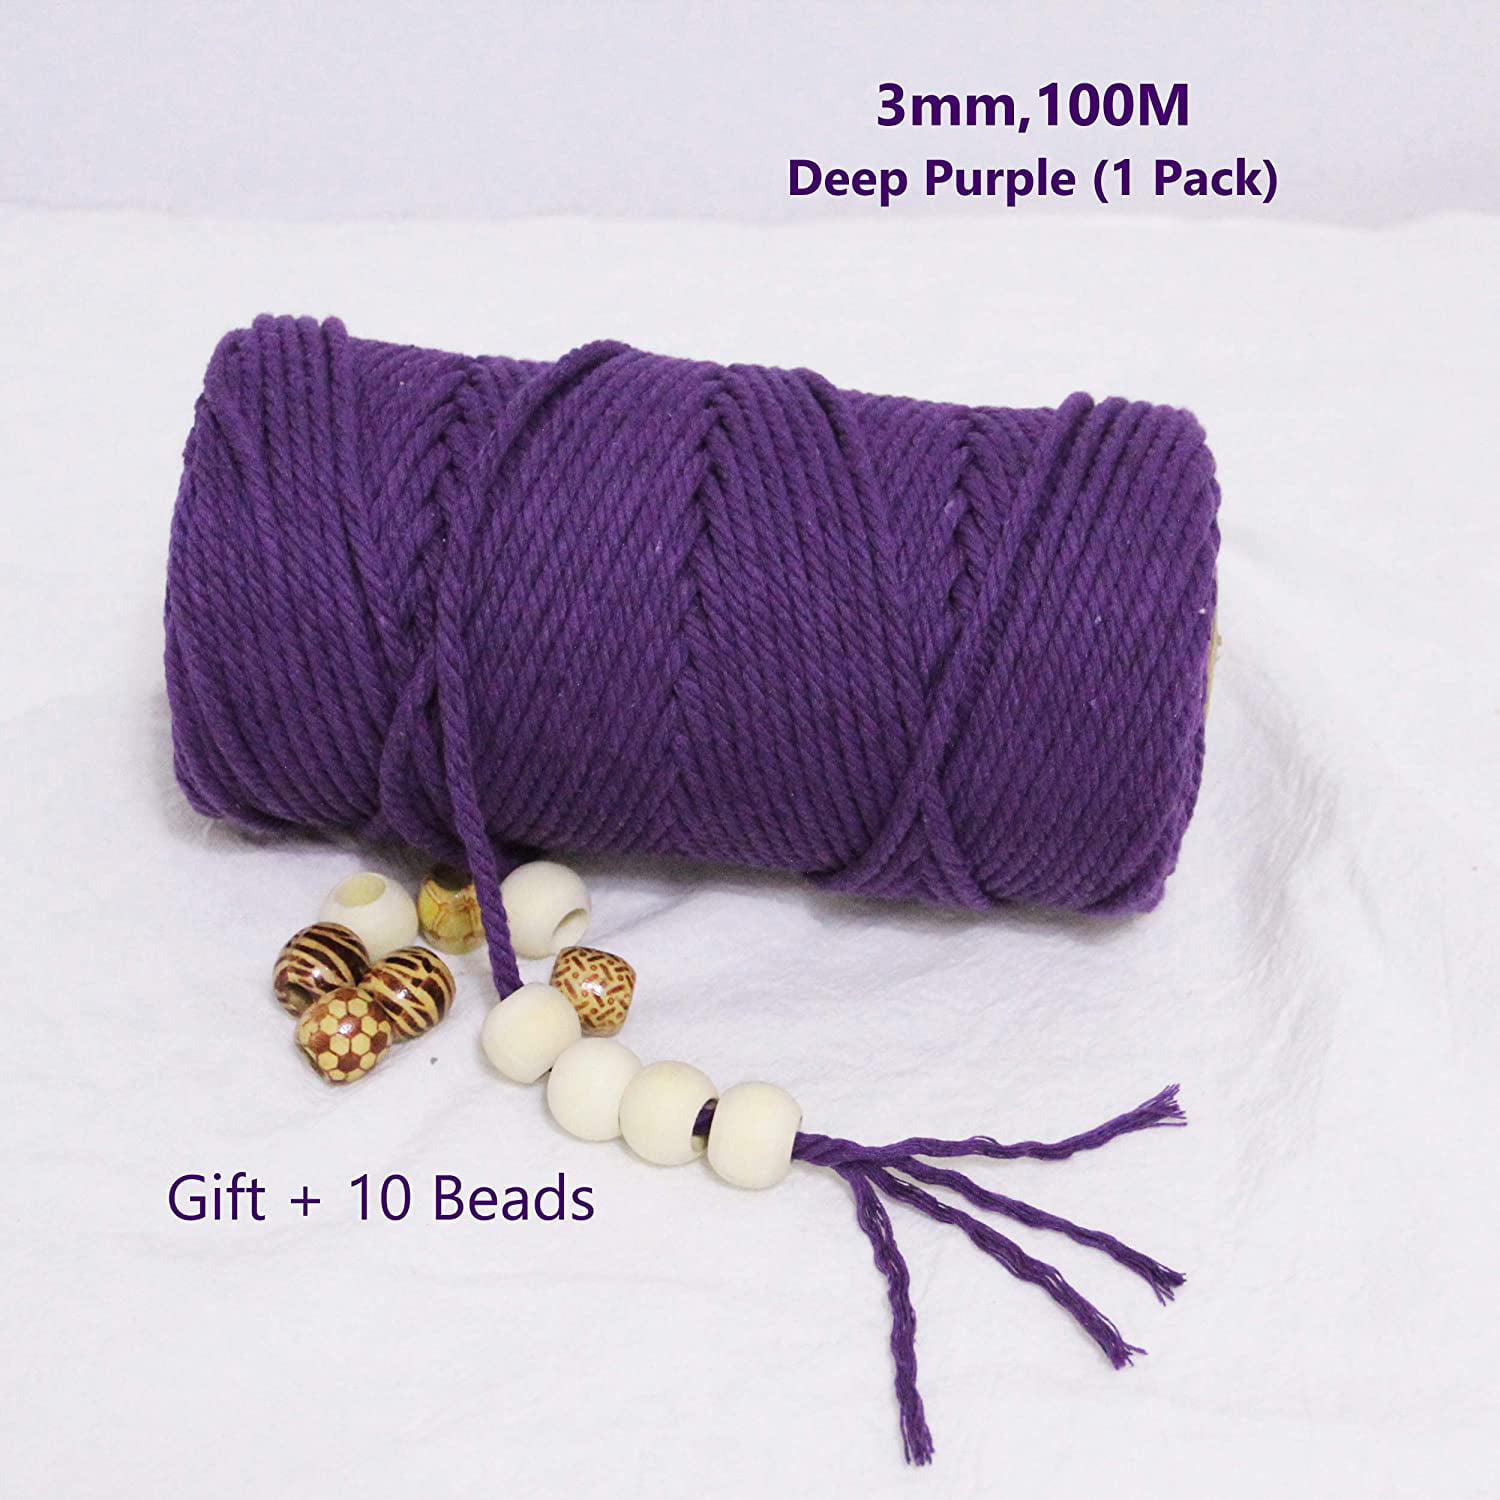 Macrame Cord 3mm 109 Yards Deep Purple 1 Pack,Natural Cotton Rope for Colored Macrame Knitting 4 Strands Twist Cotton Rope Macrame 3mm for Beginner Handmade Colored Wall Hanging Weaving Tapestry 